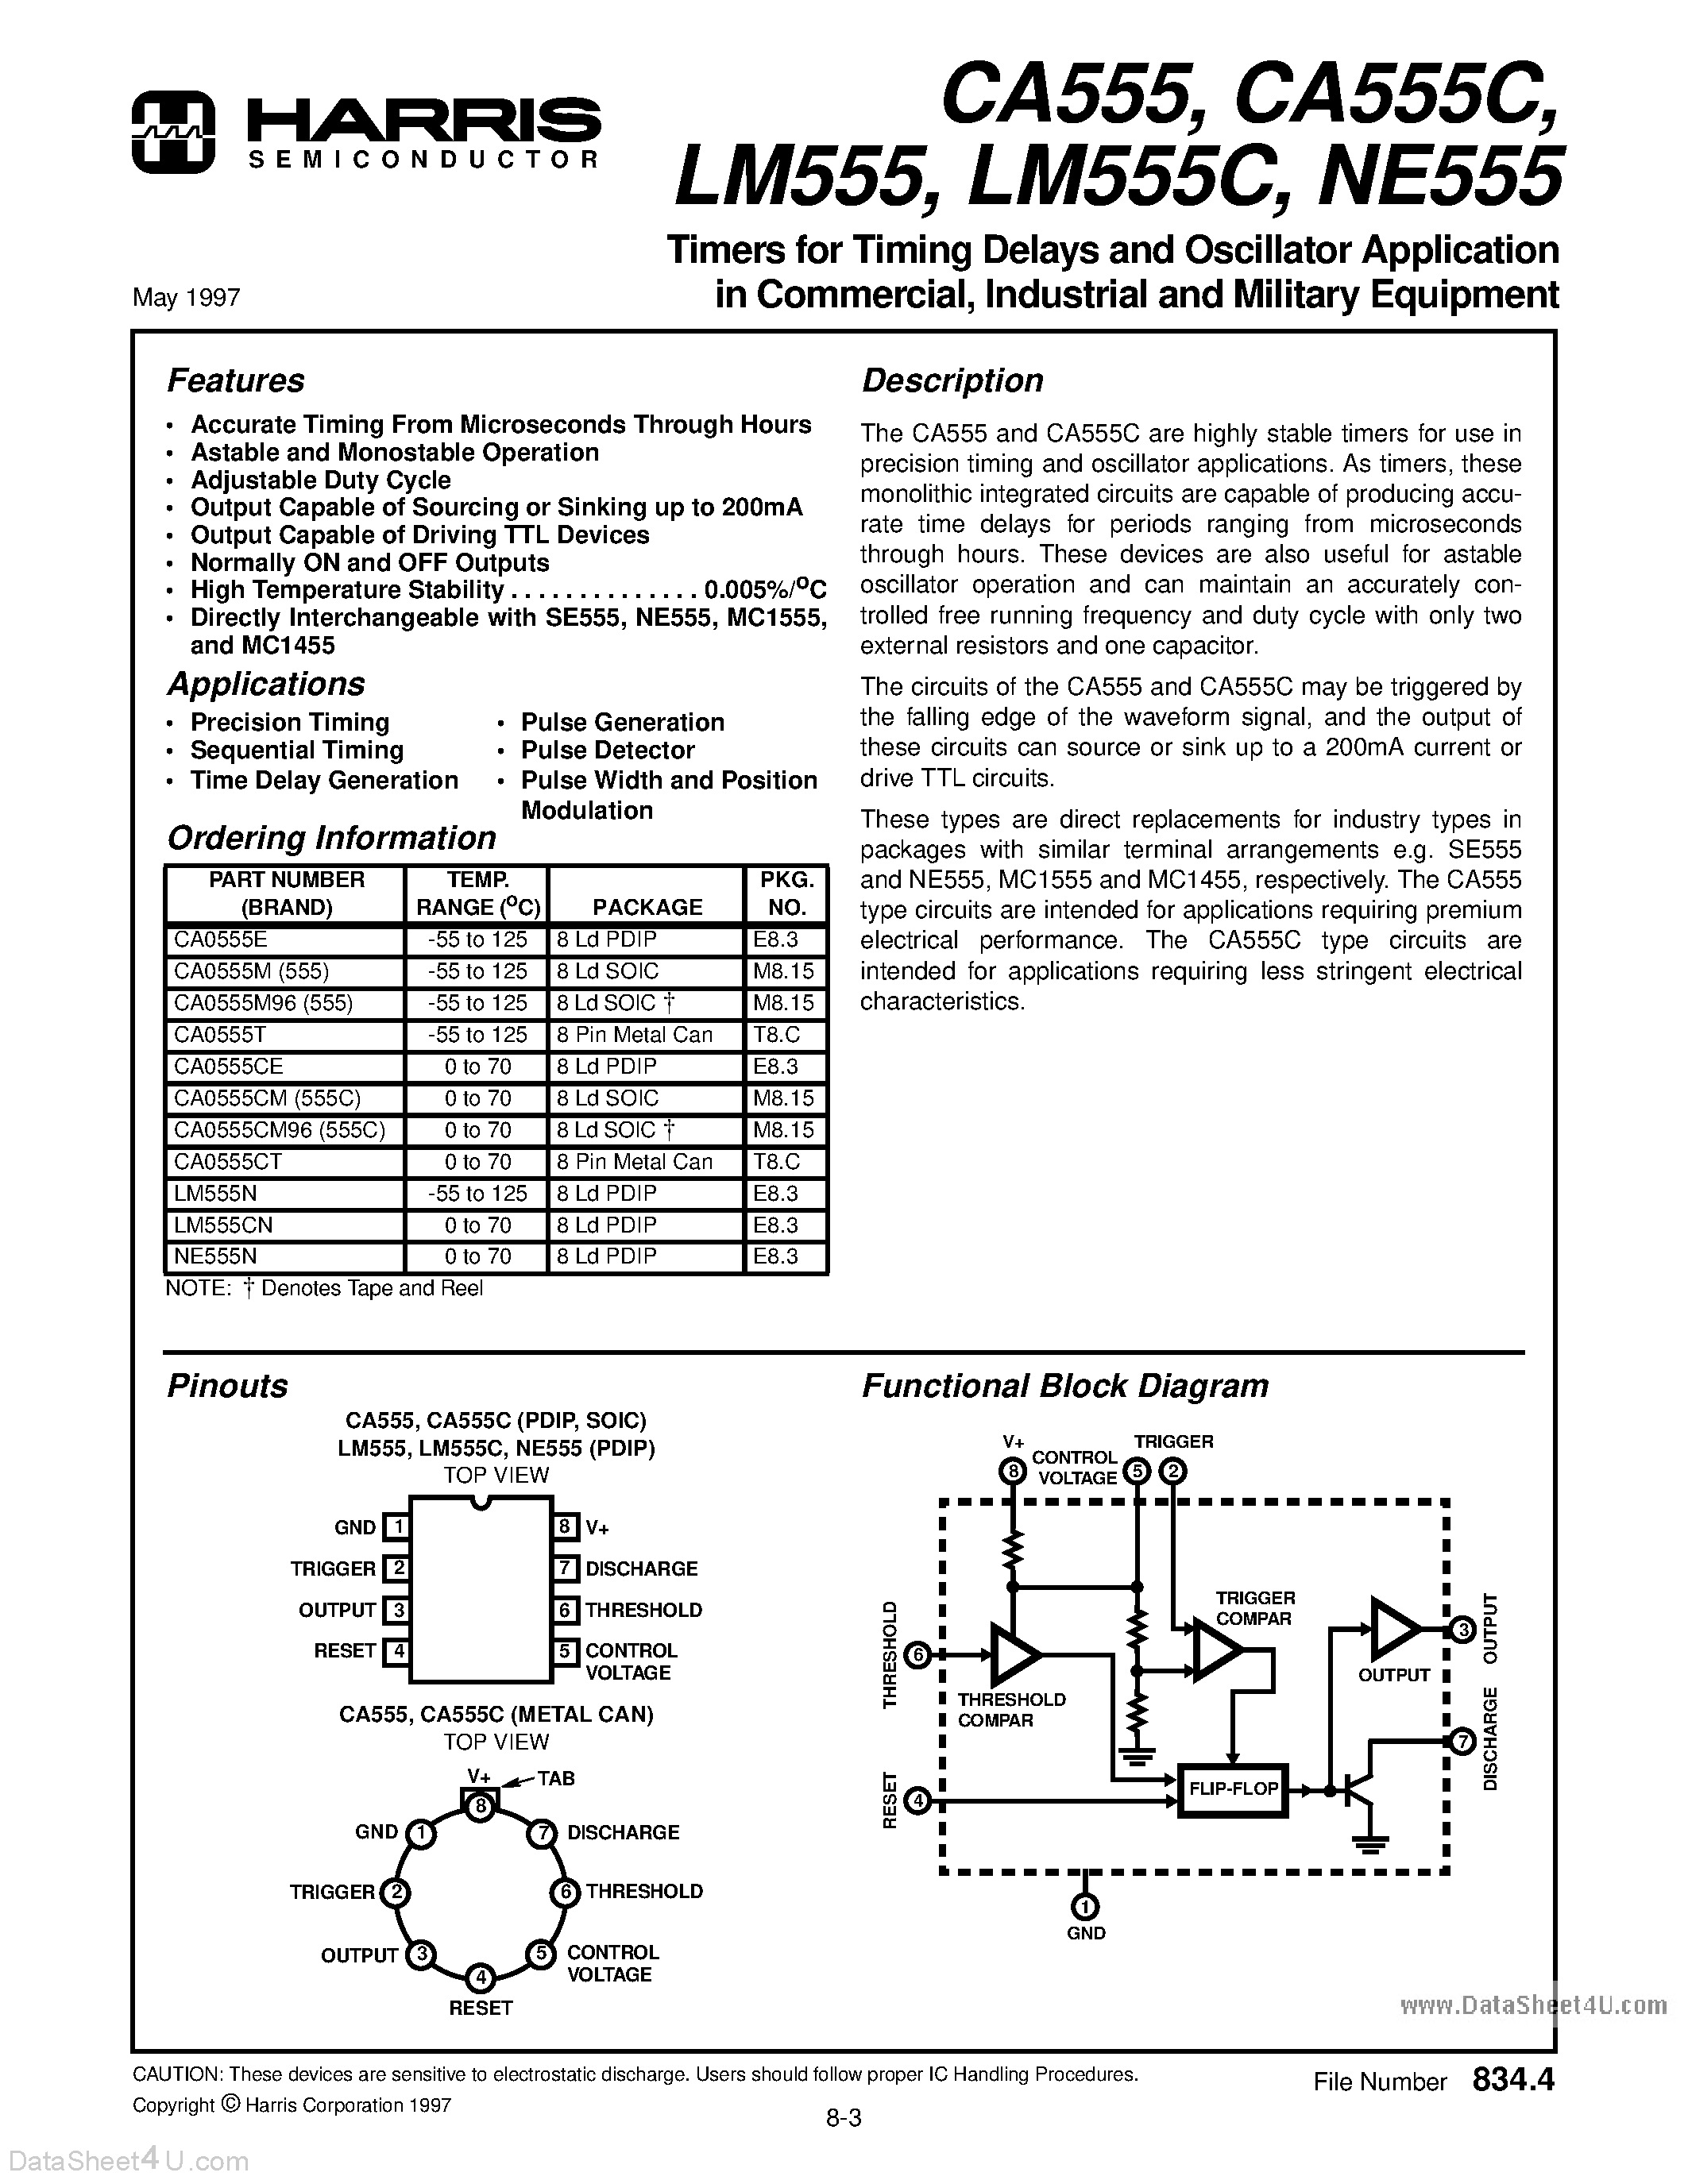 Datasheet LM555 - Timers for Timing Delays and Oscillator Application page 1